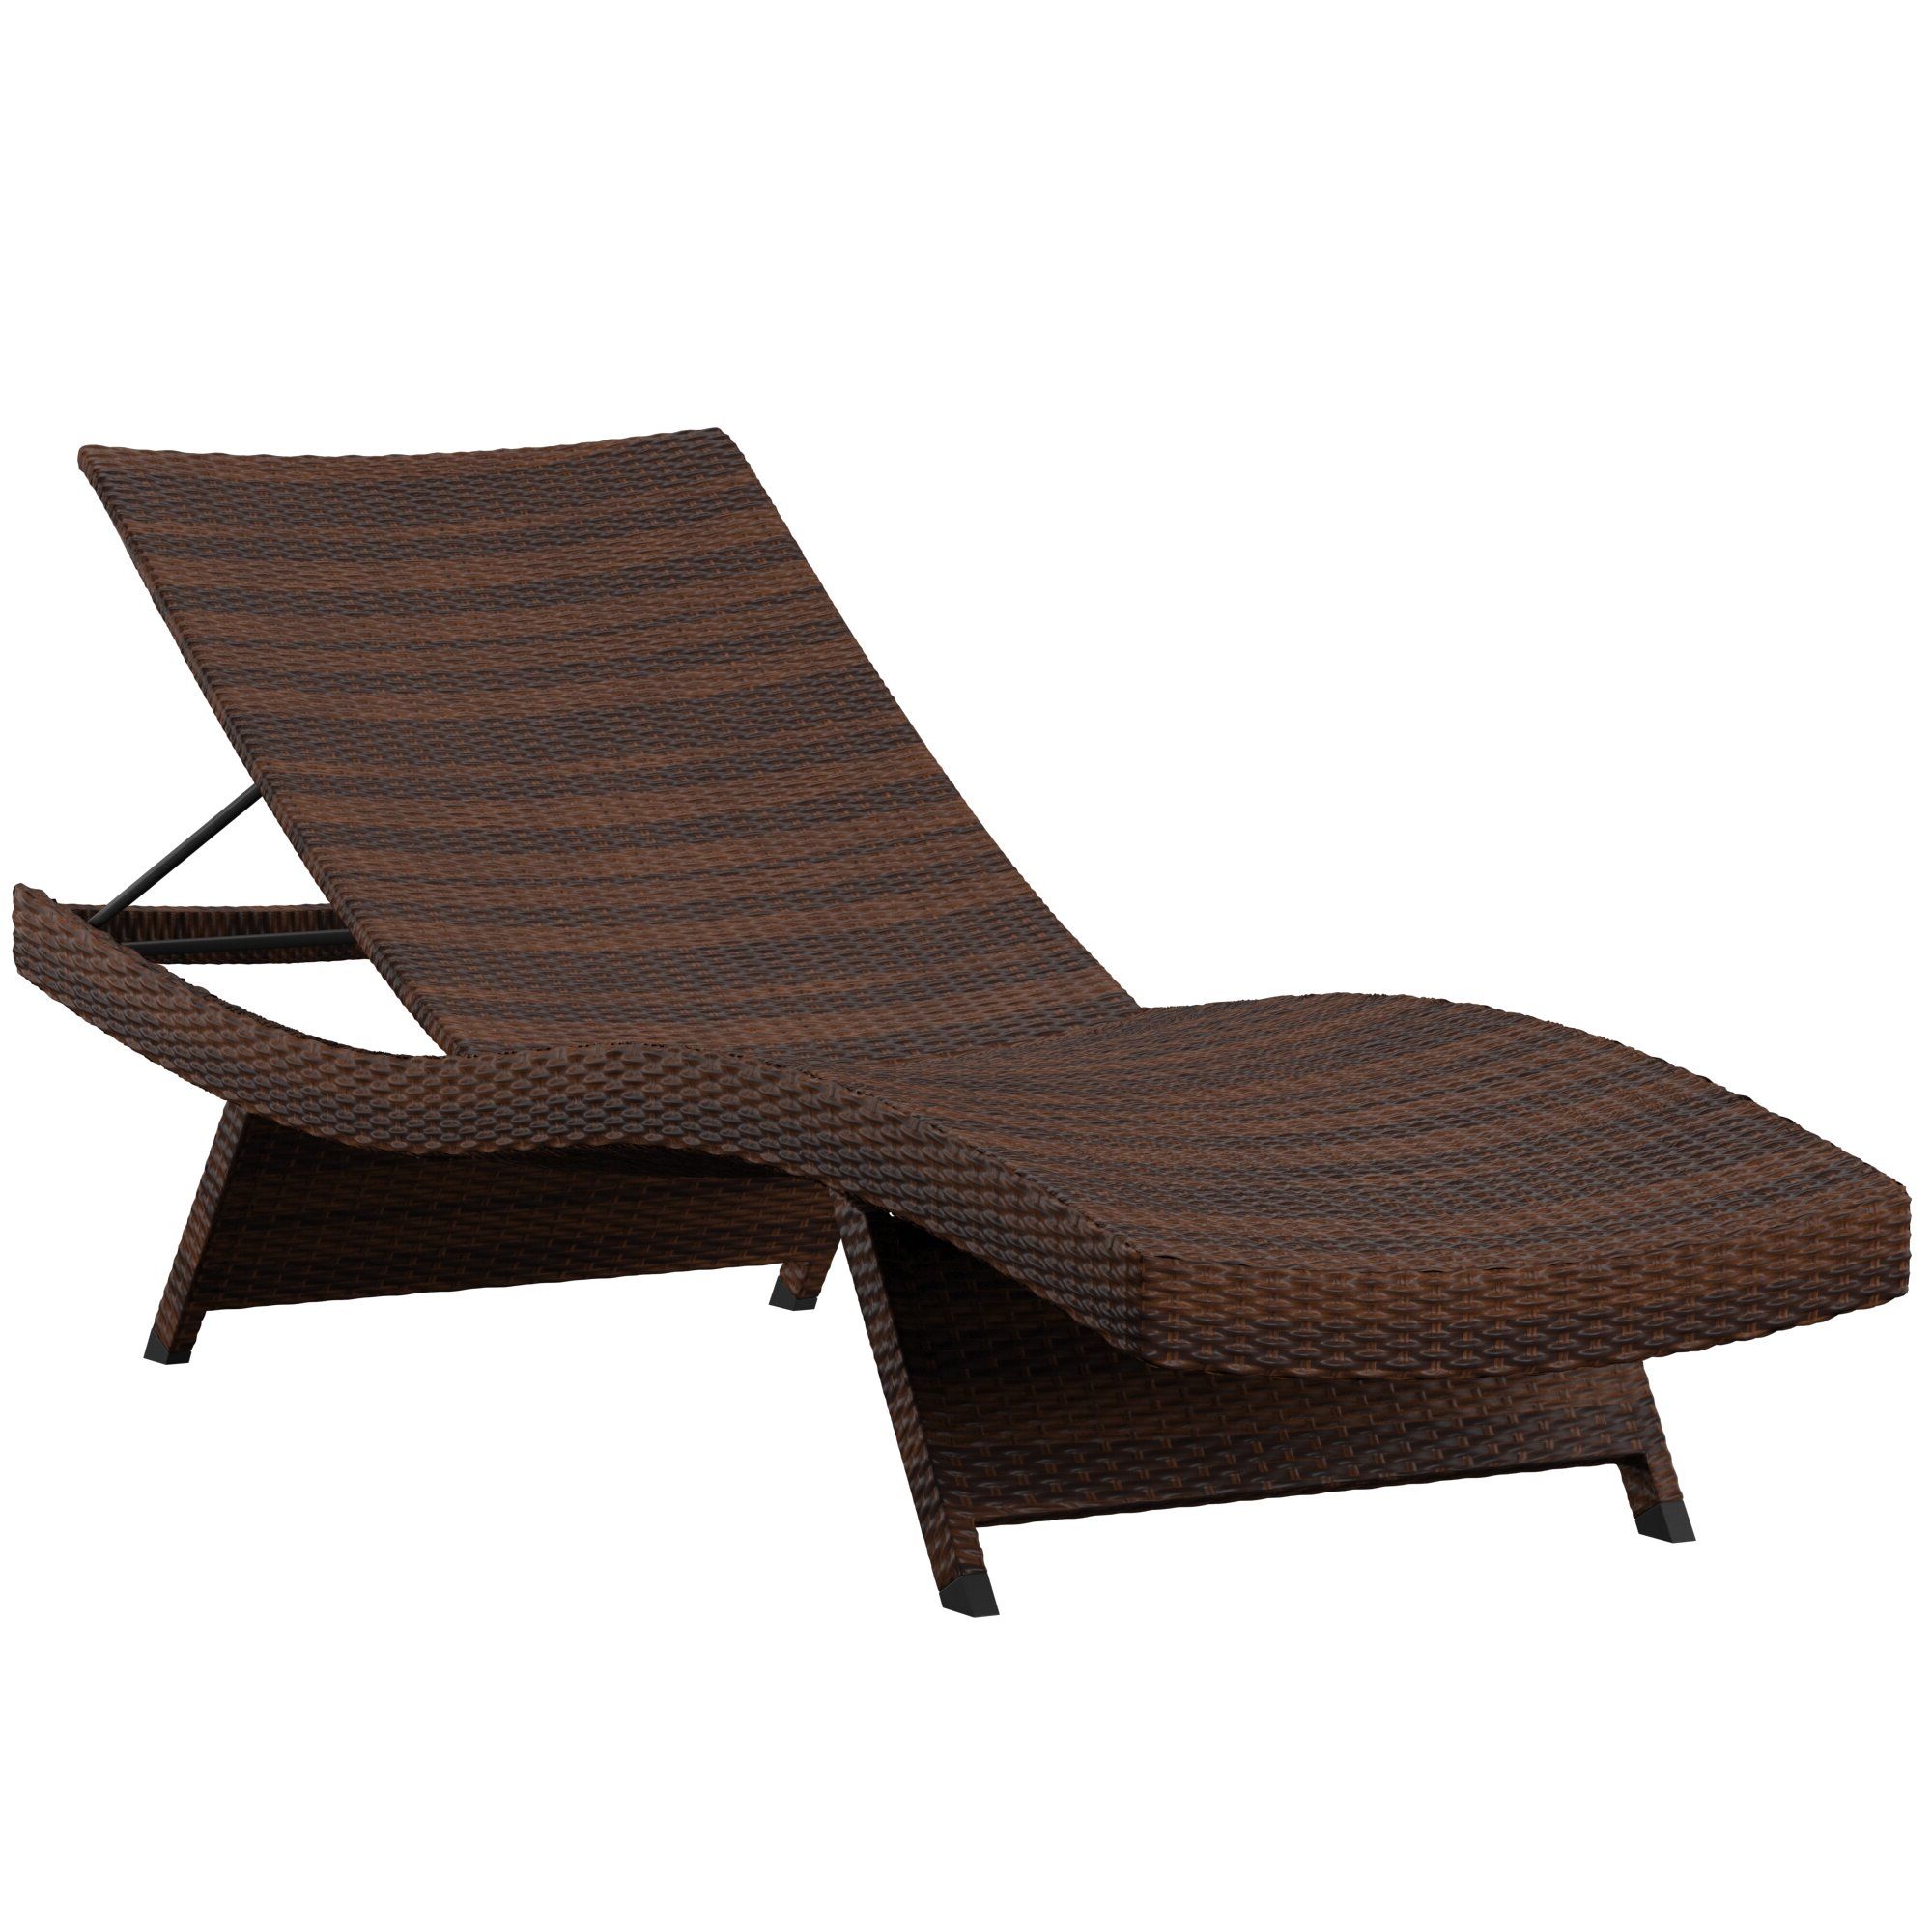 Favorite Rebello Reclining Chaise Lounge For Outdoor Sling Eucalyptus Chaise Loungers (View 22 of 25)